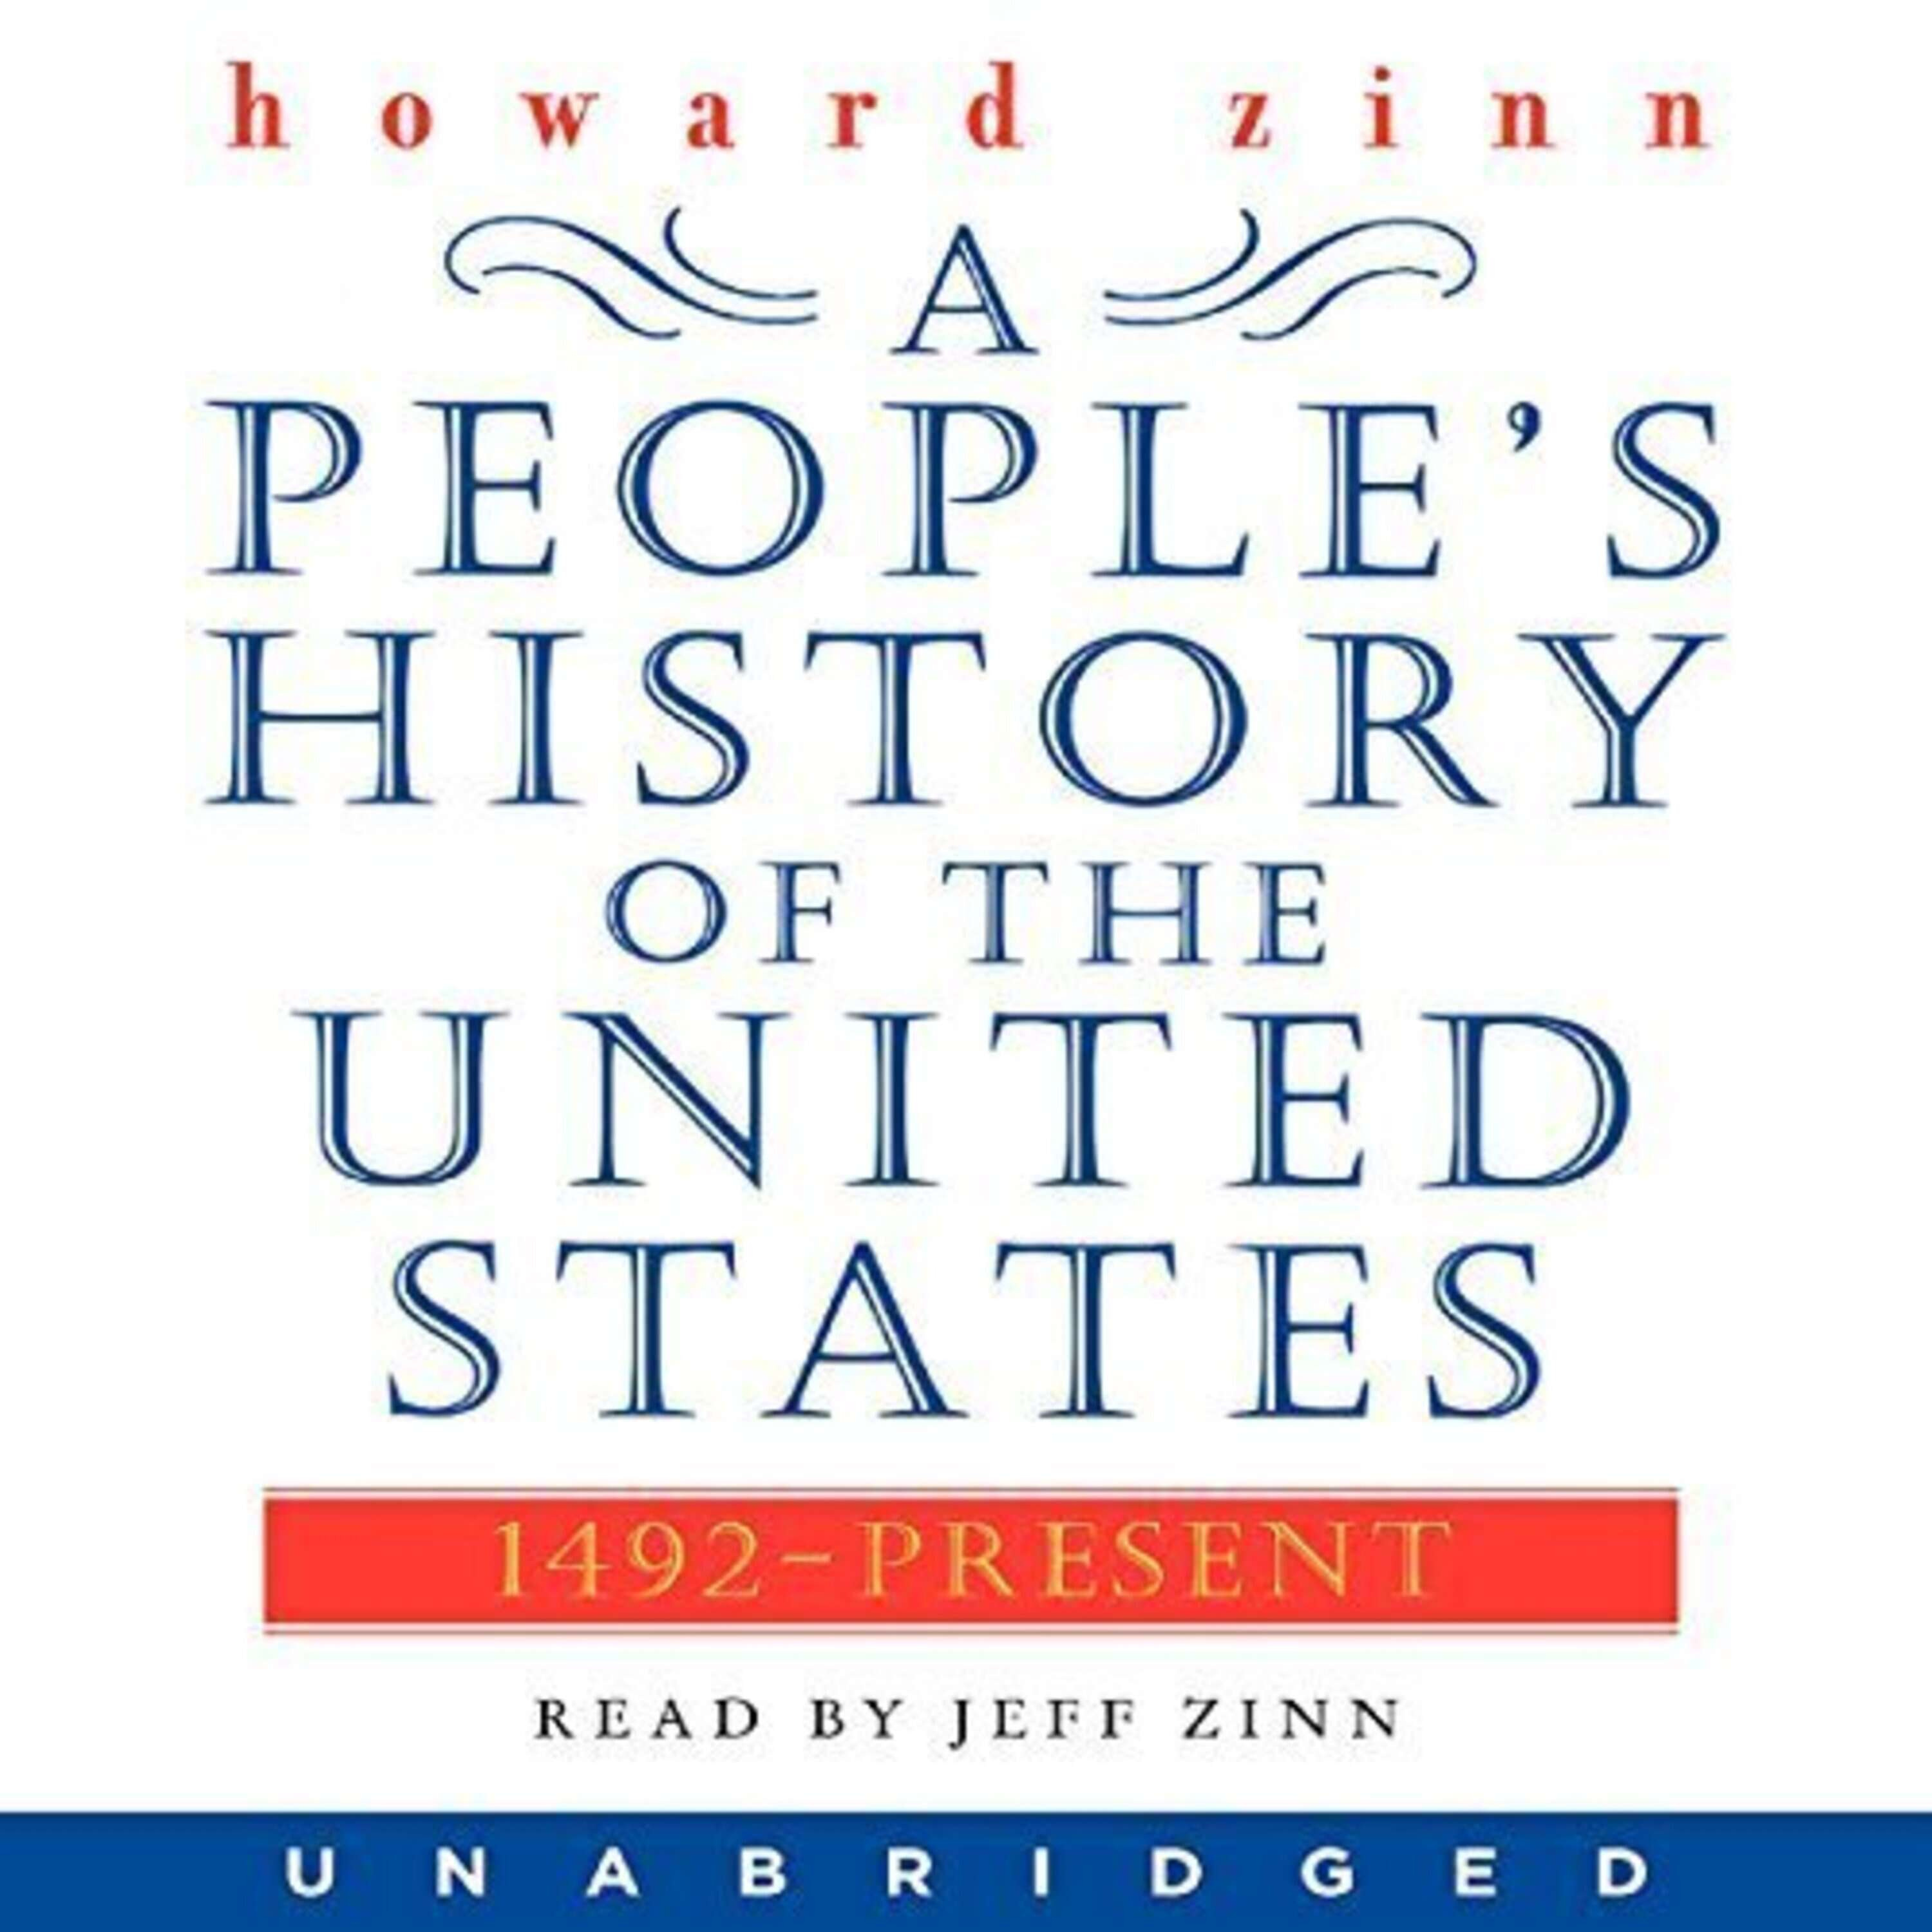 Part Five - A People’s History of the United States; Howard Zinn